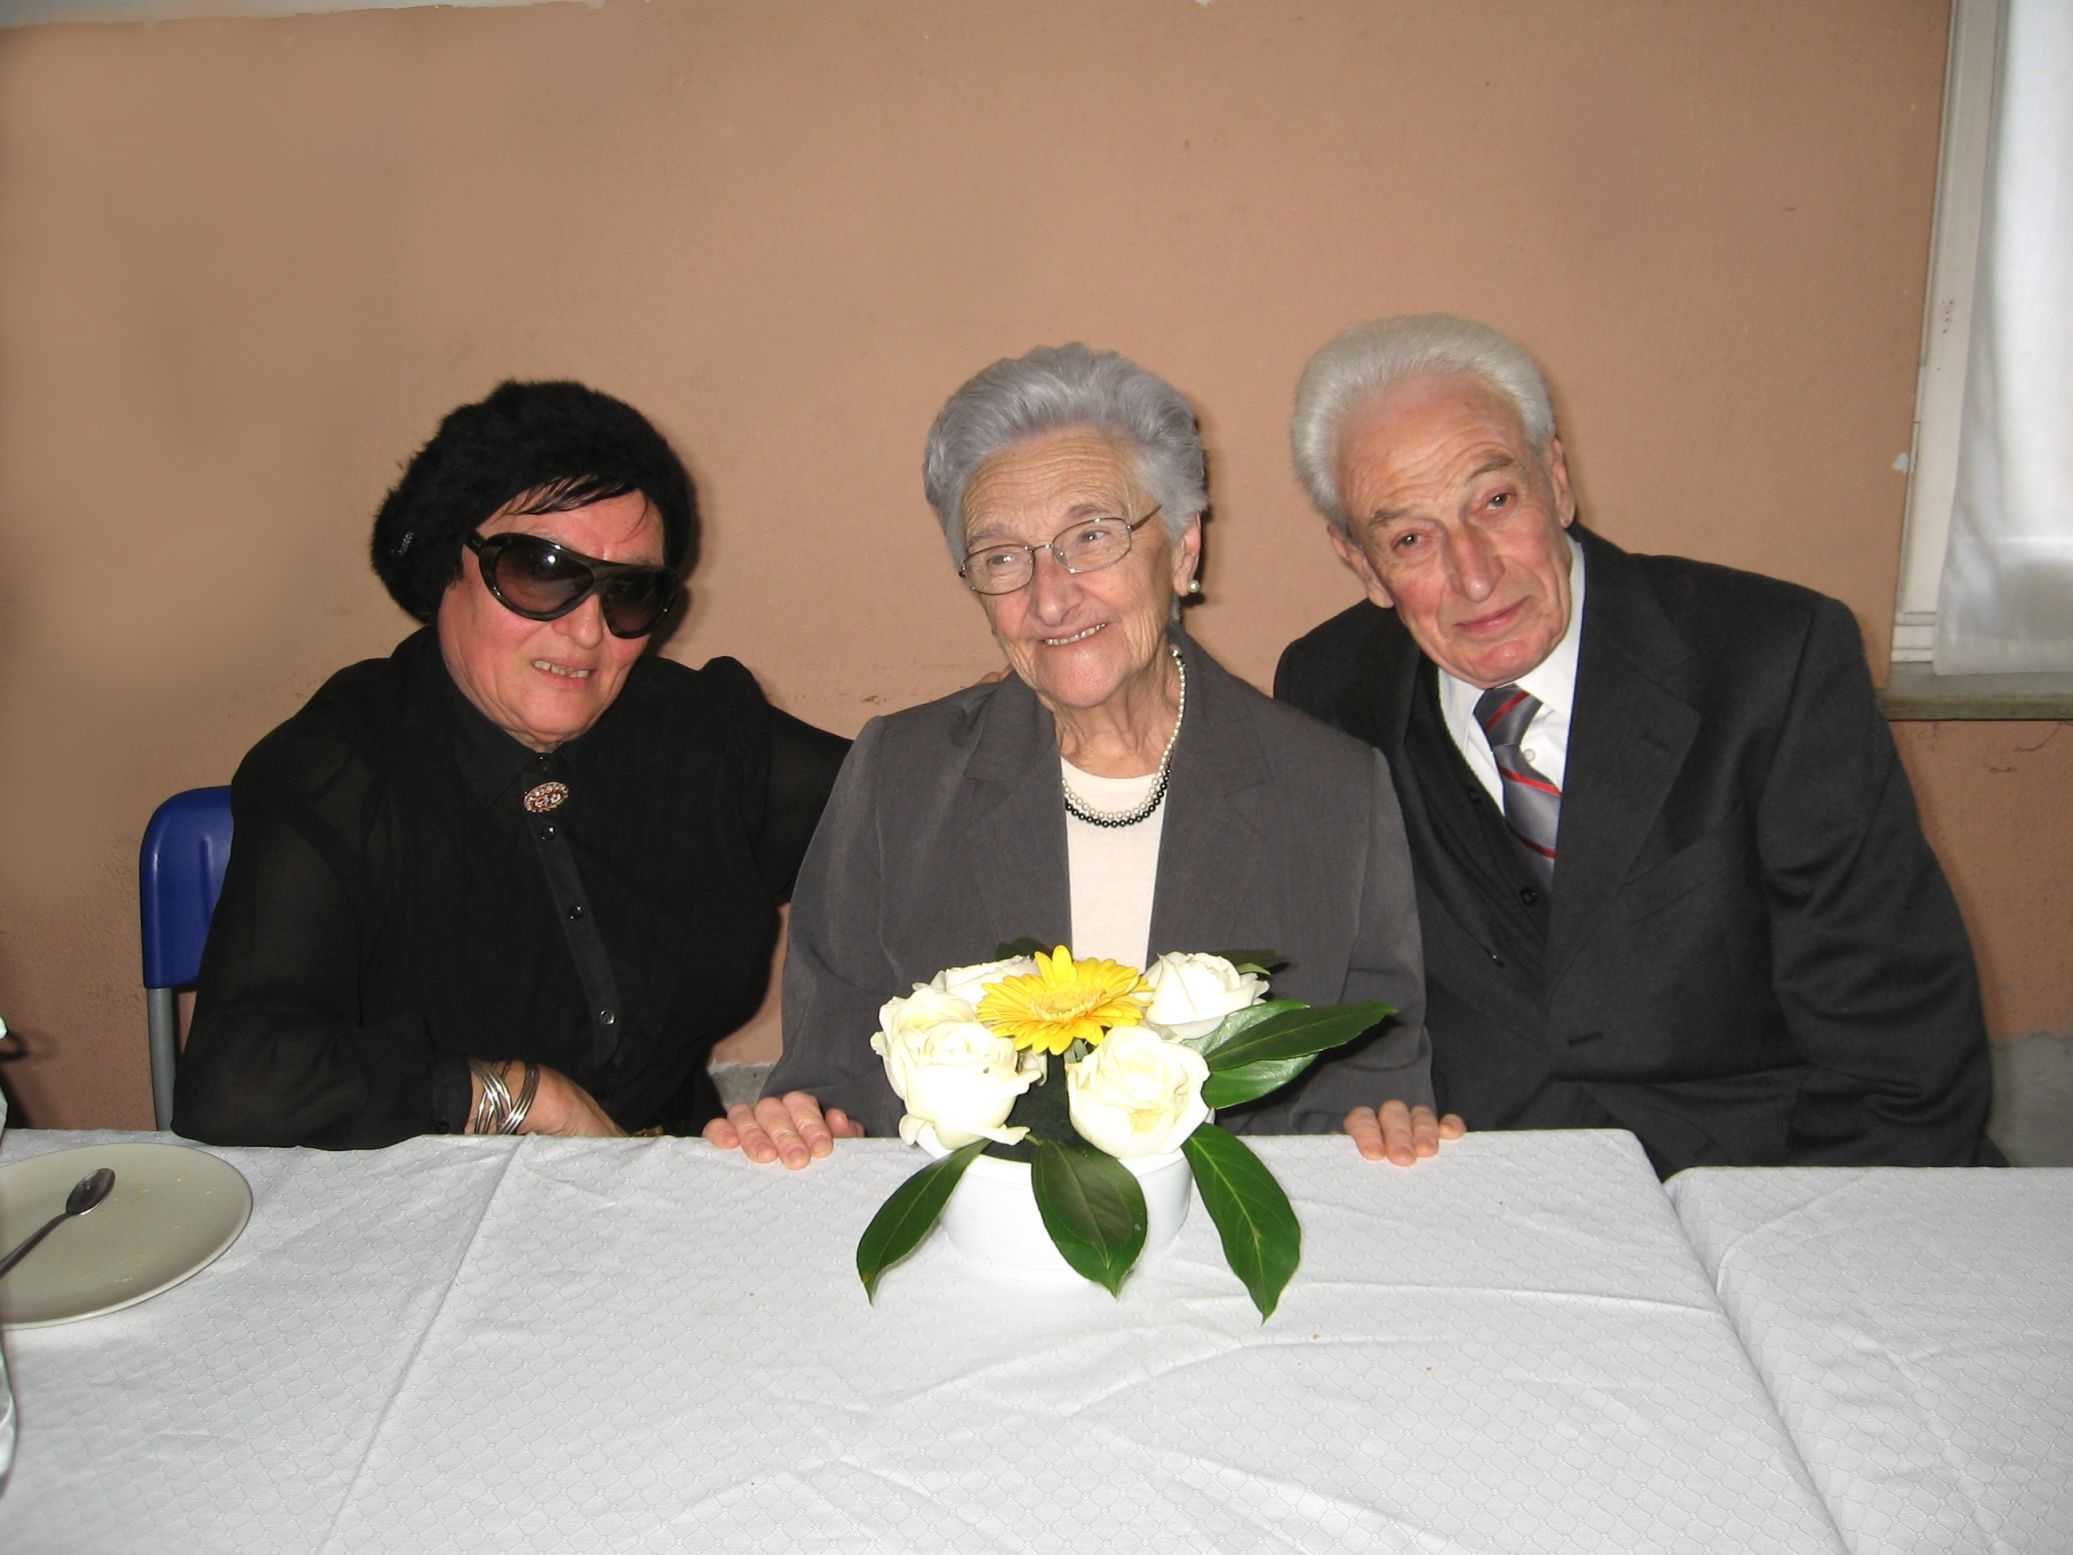 Compleanno-2010-02-07--14.49.15